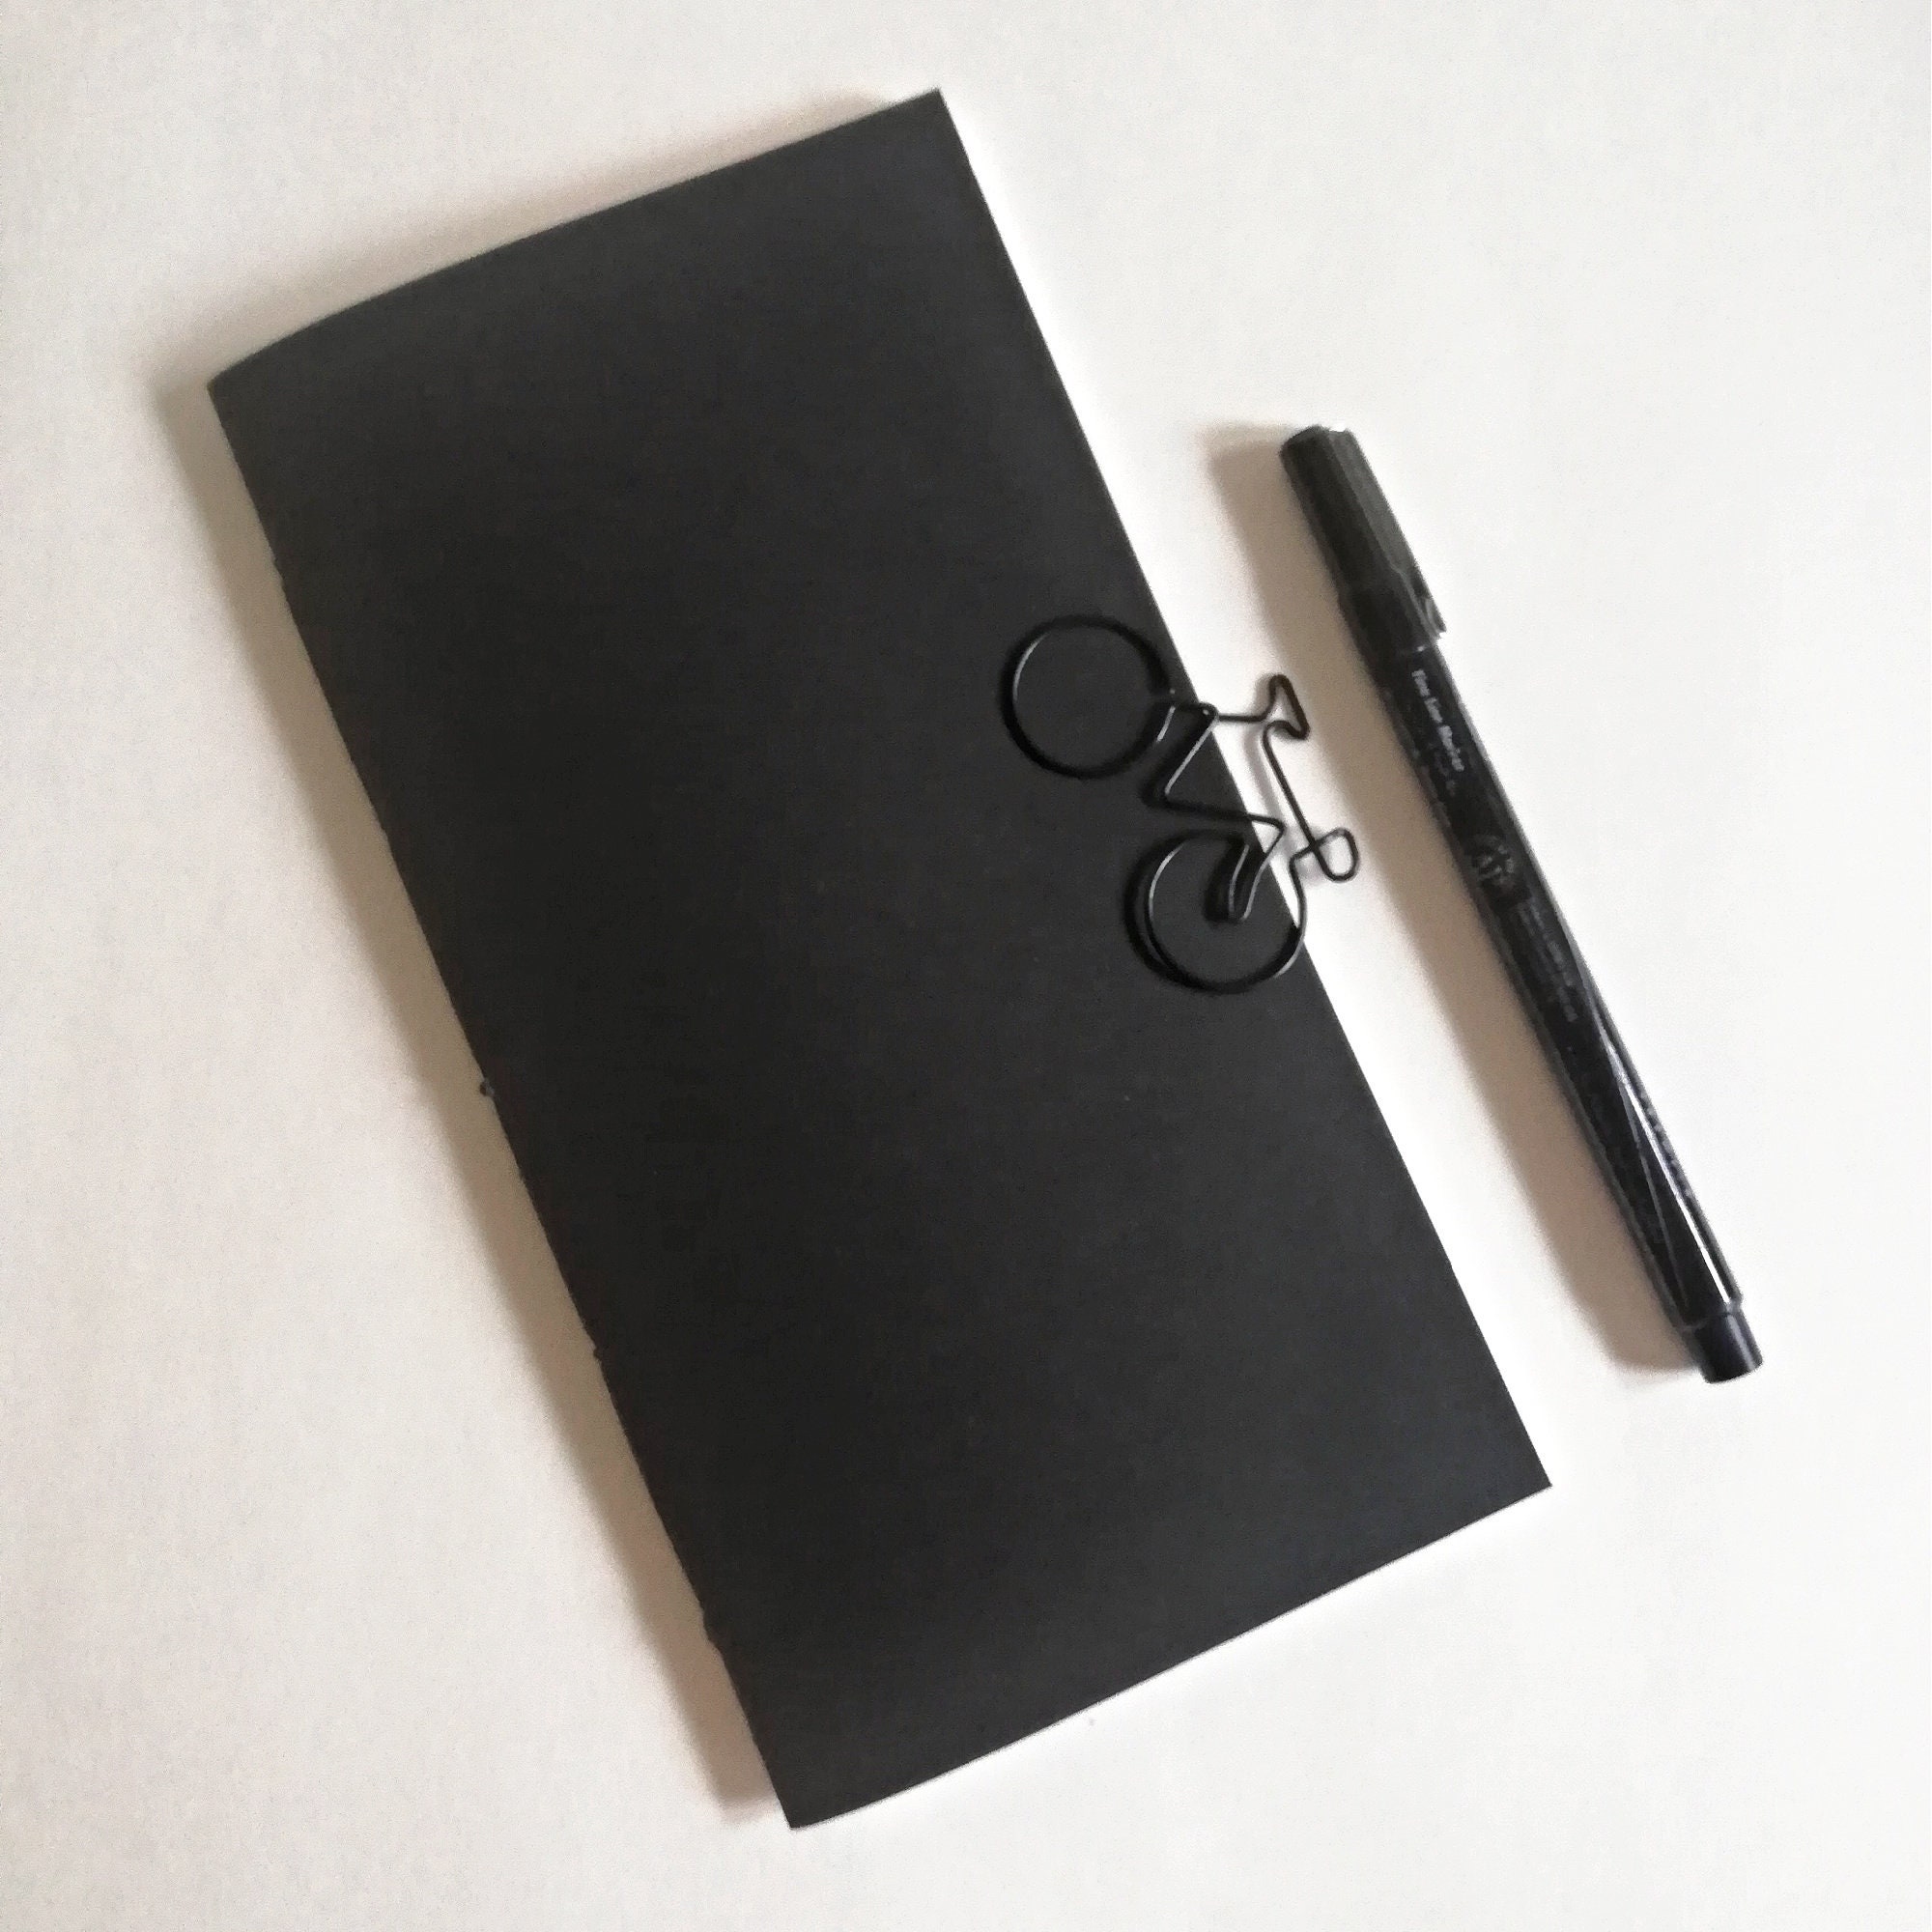 Week on 2 Pages, Minimalist, V006 Travelers Notebook Insert